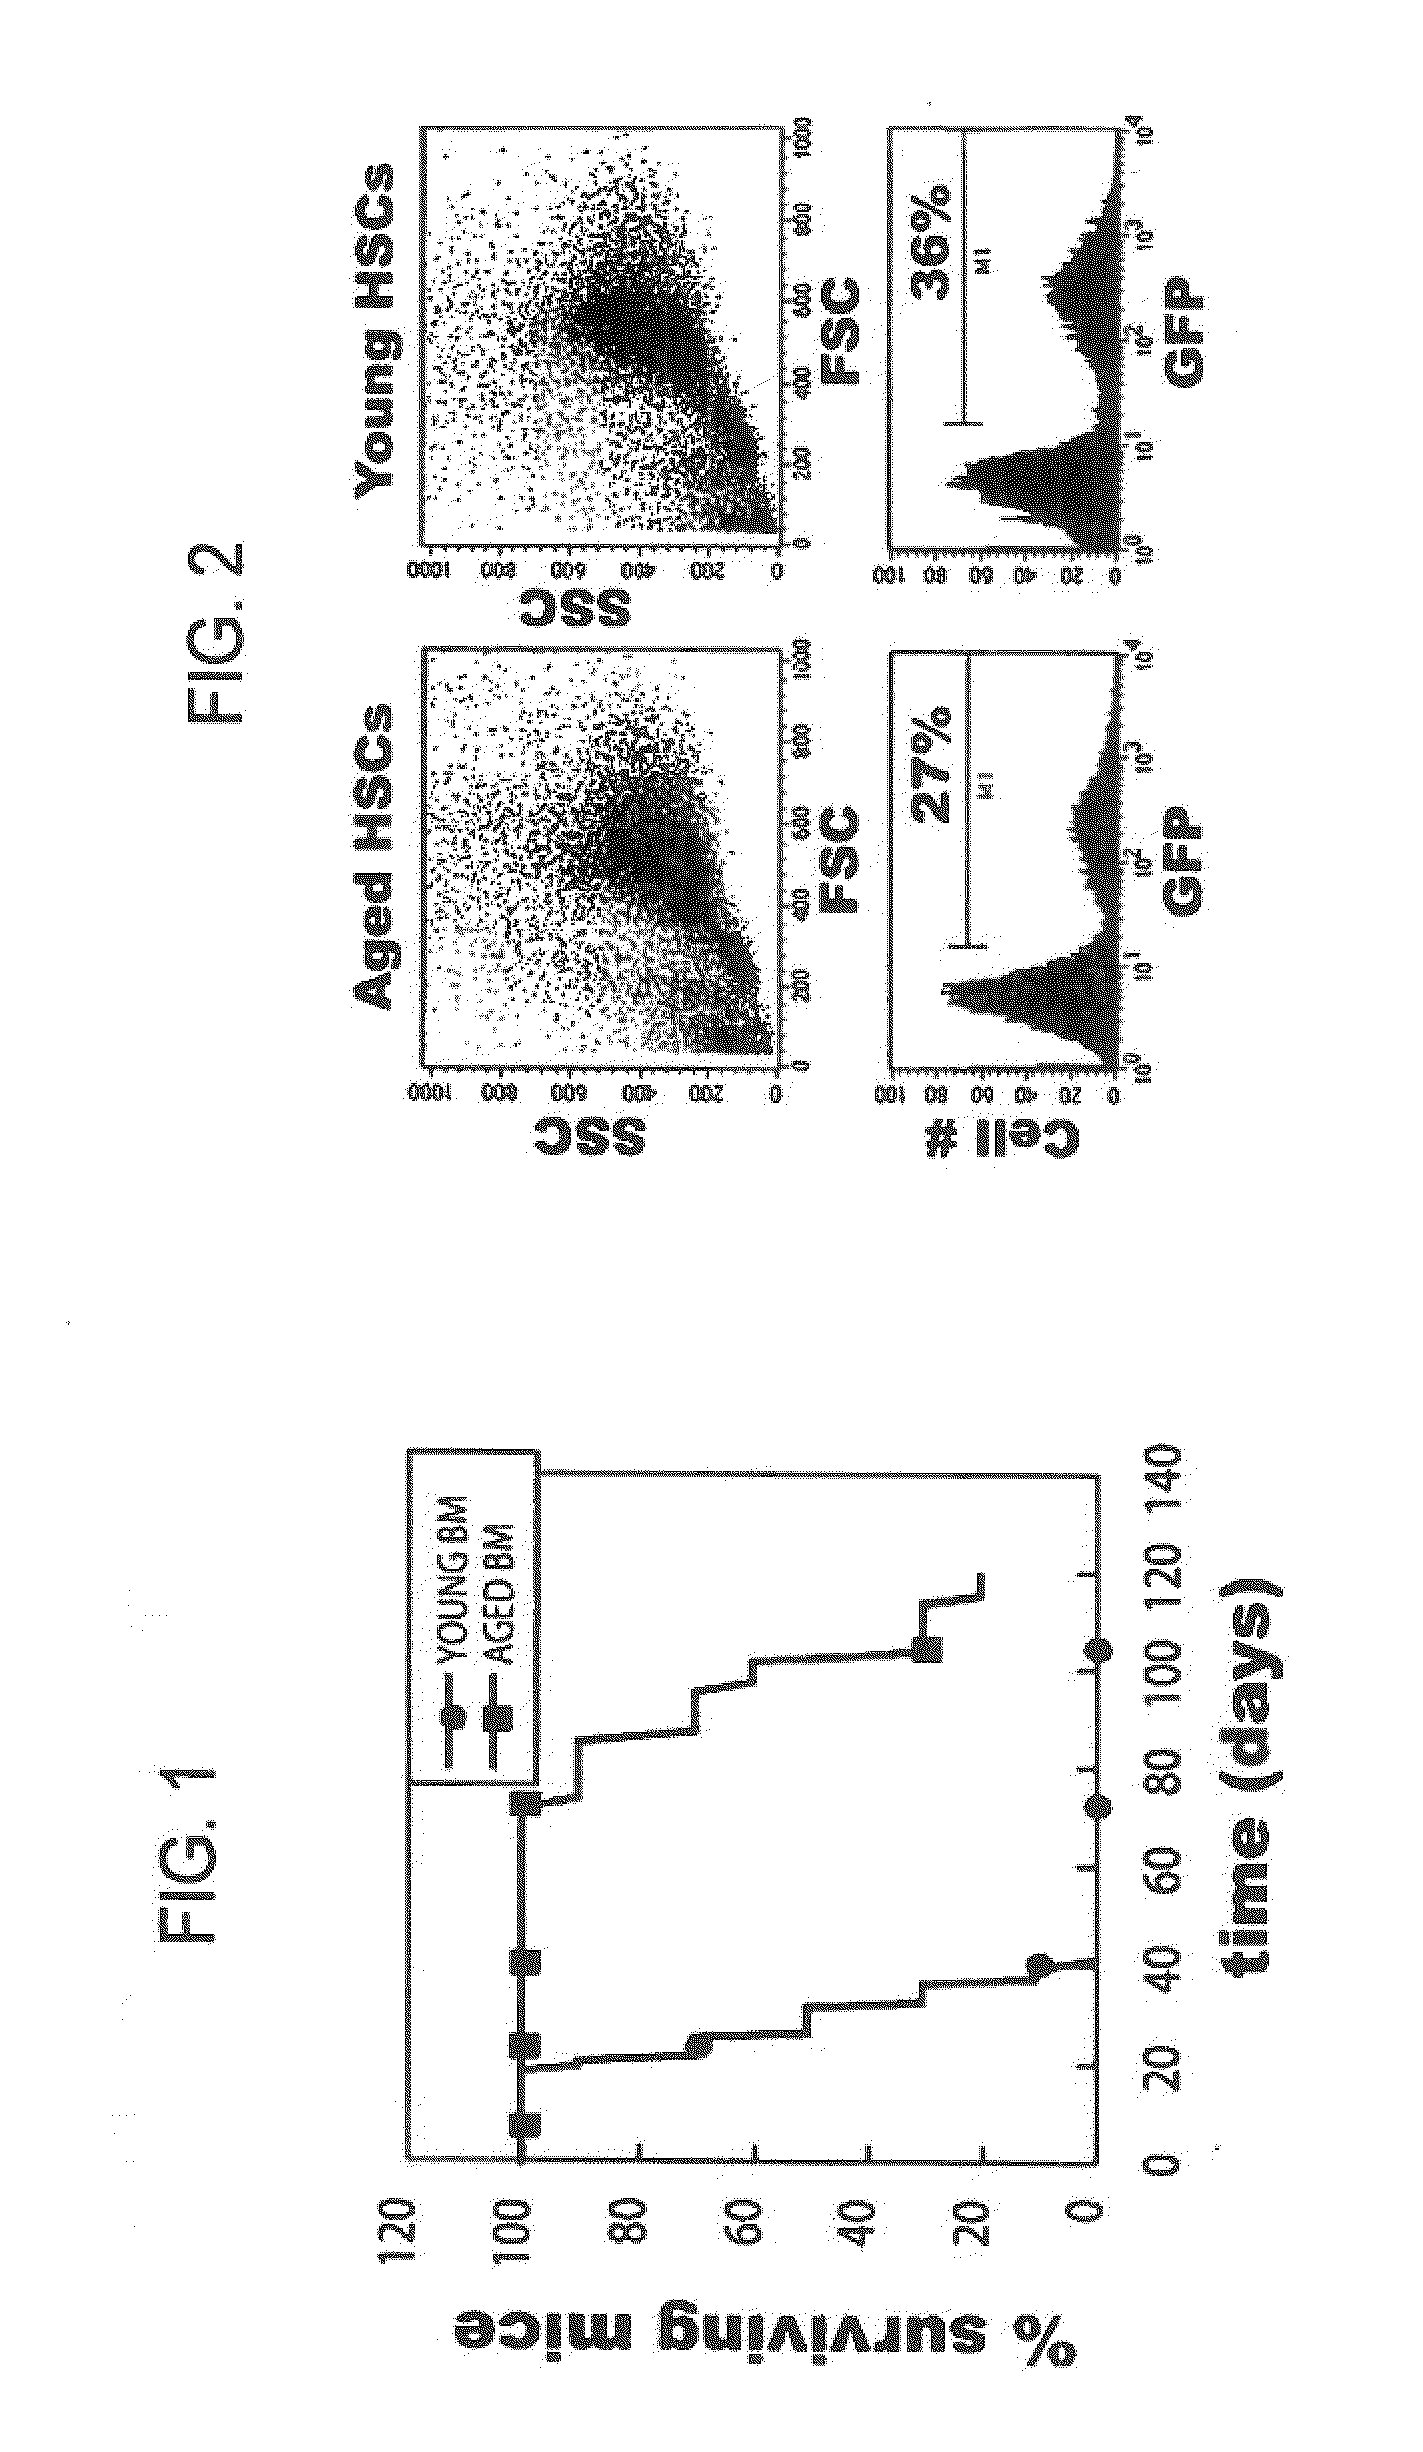 Conditionally immortalized long-term stem cells and methods of making and using such cells